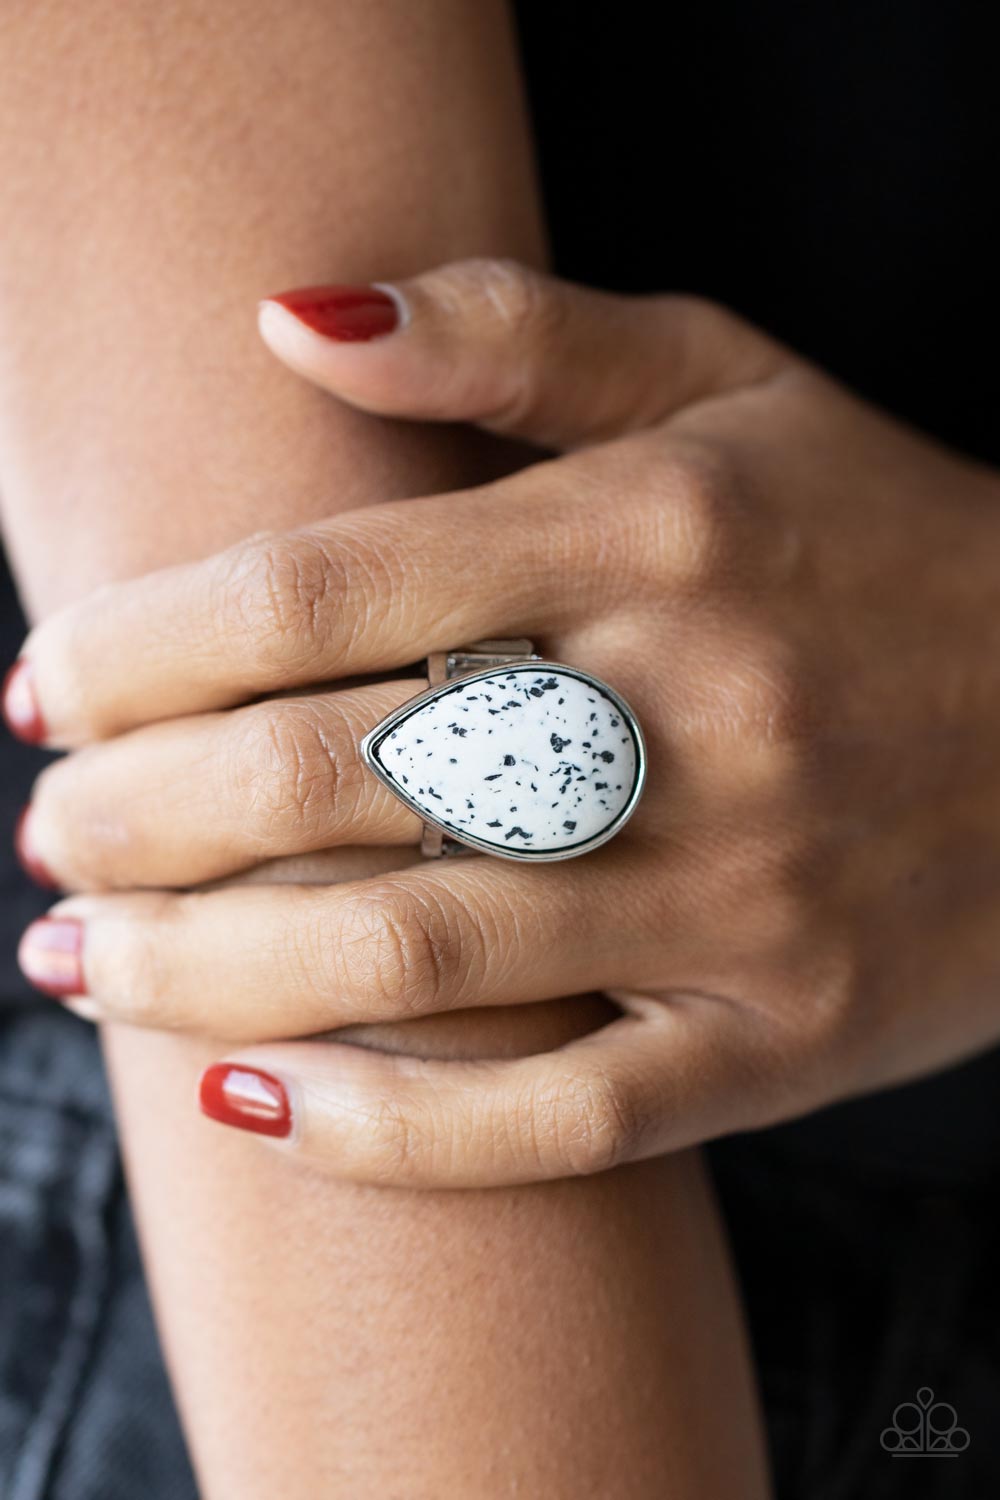 White Stone Ring with Black Speckles